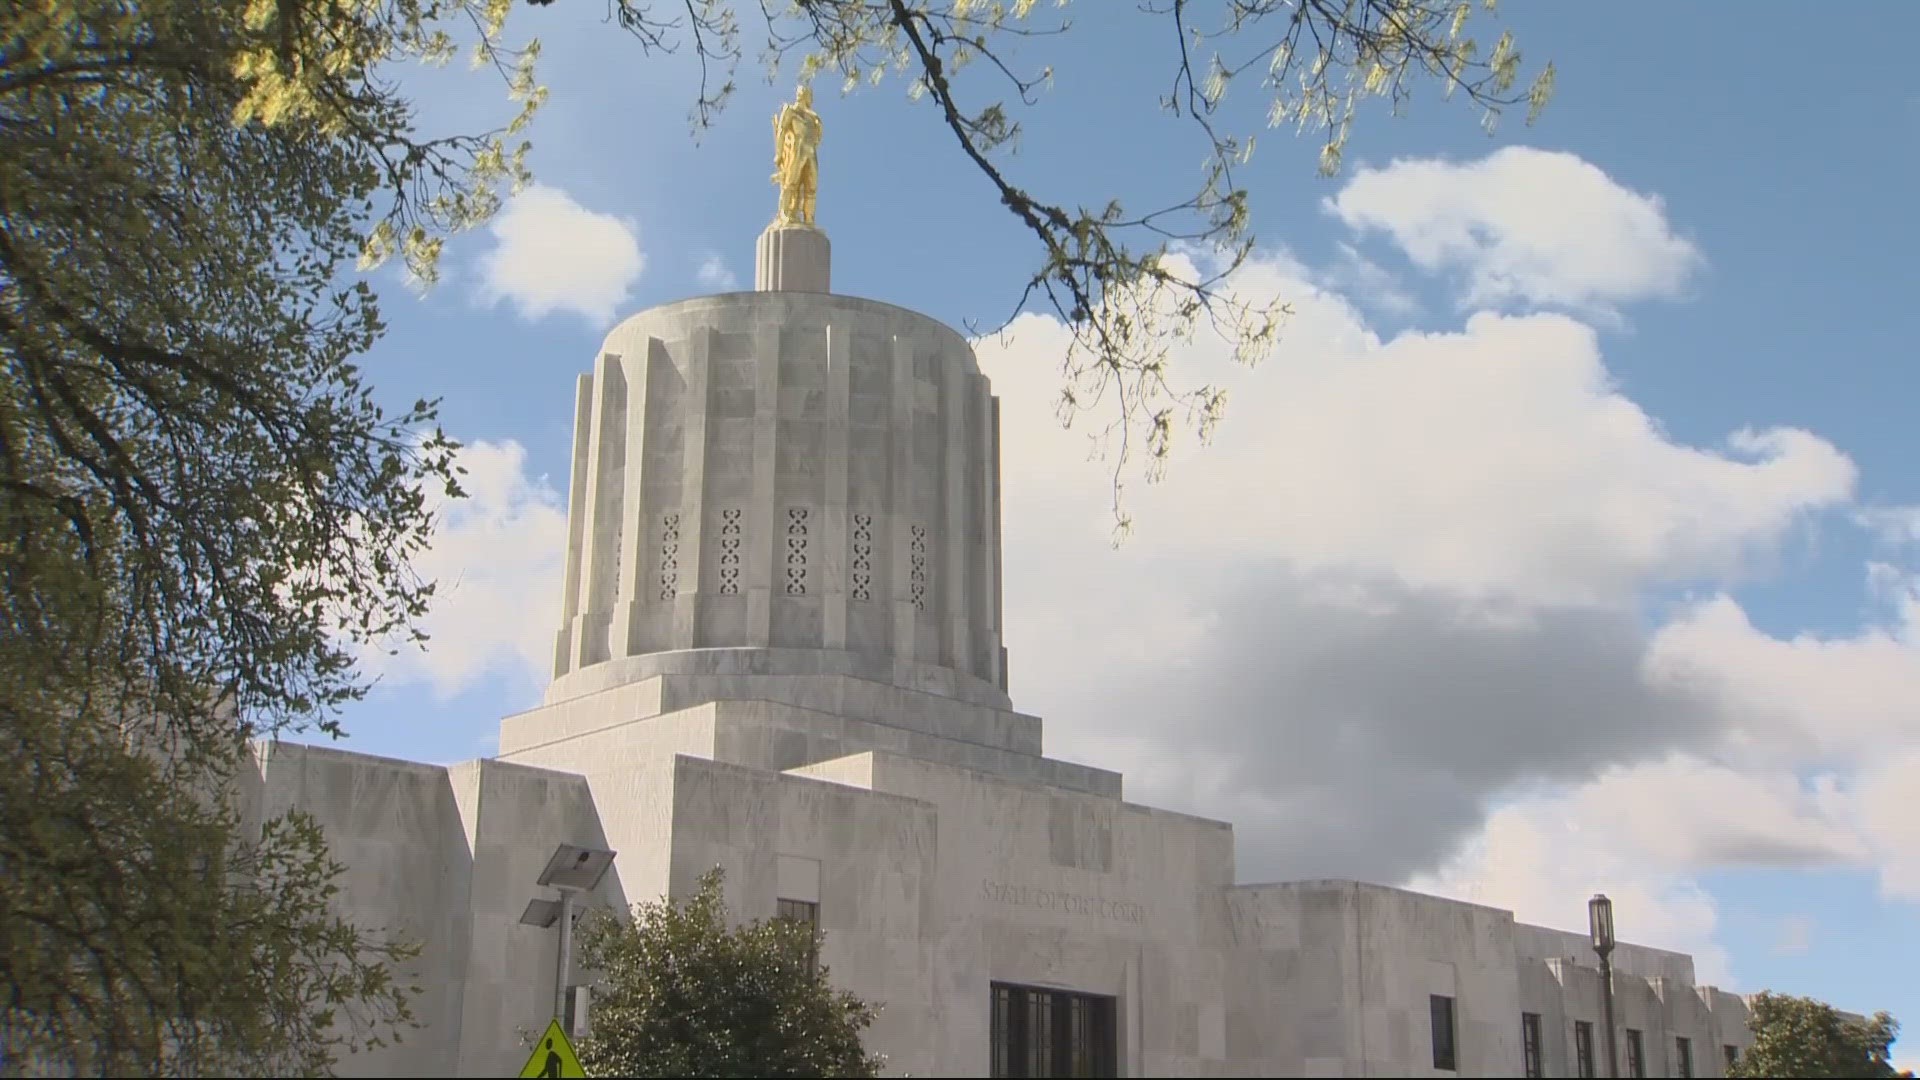 Under Measure 113, passed by Oregon voters last year, lawmakers face penalties if they have more than 10 unexcused absences in a session.